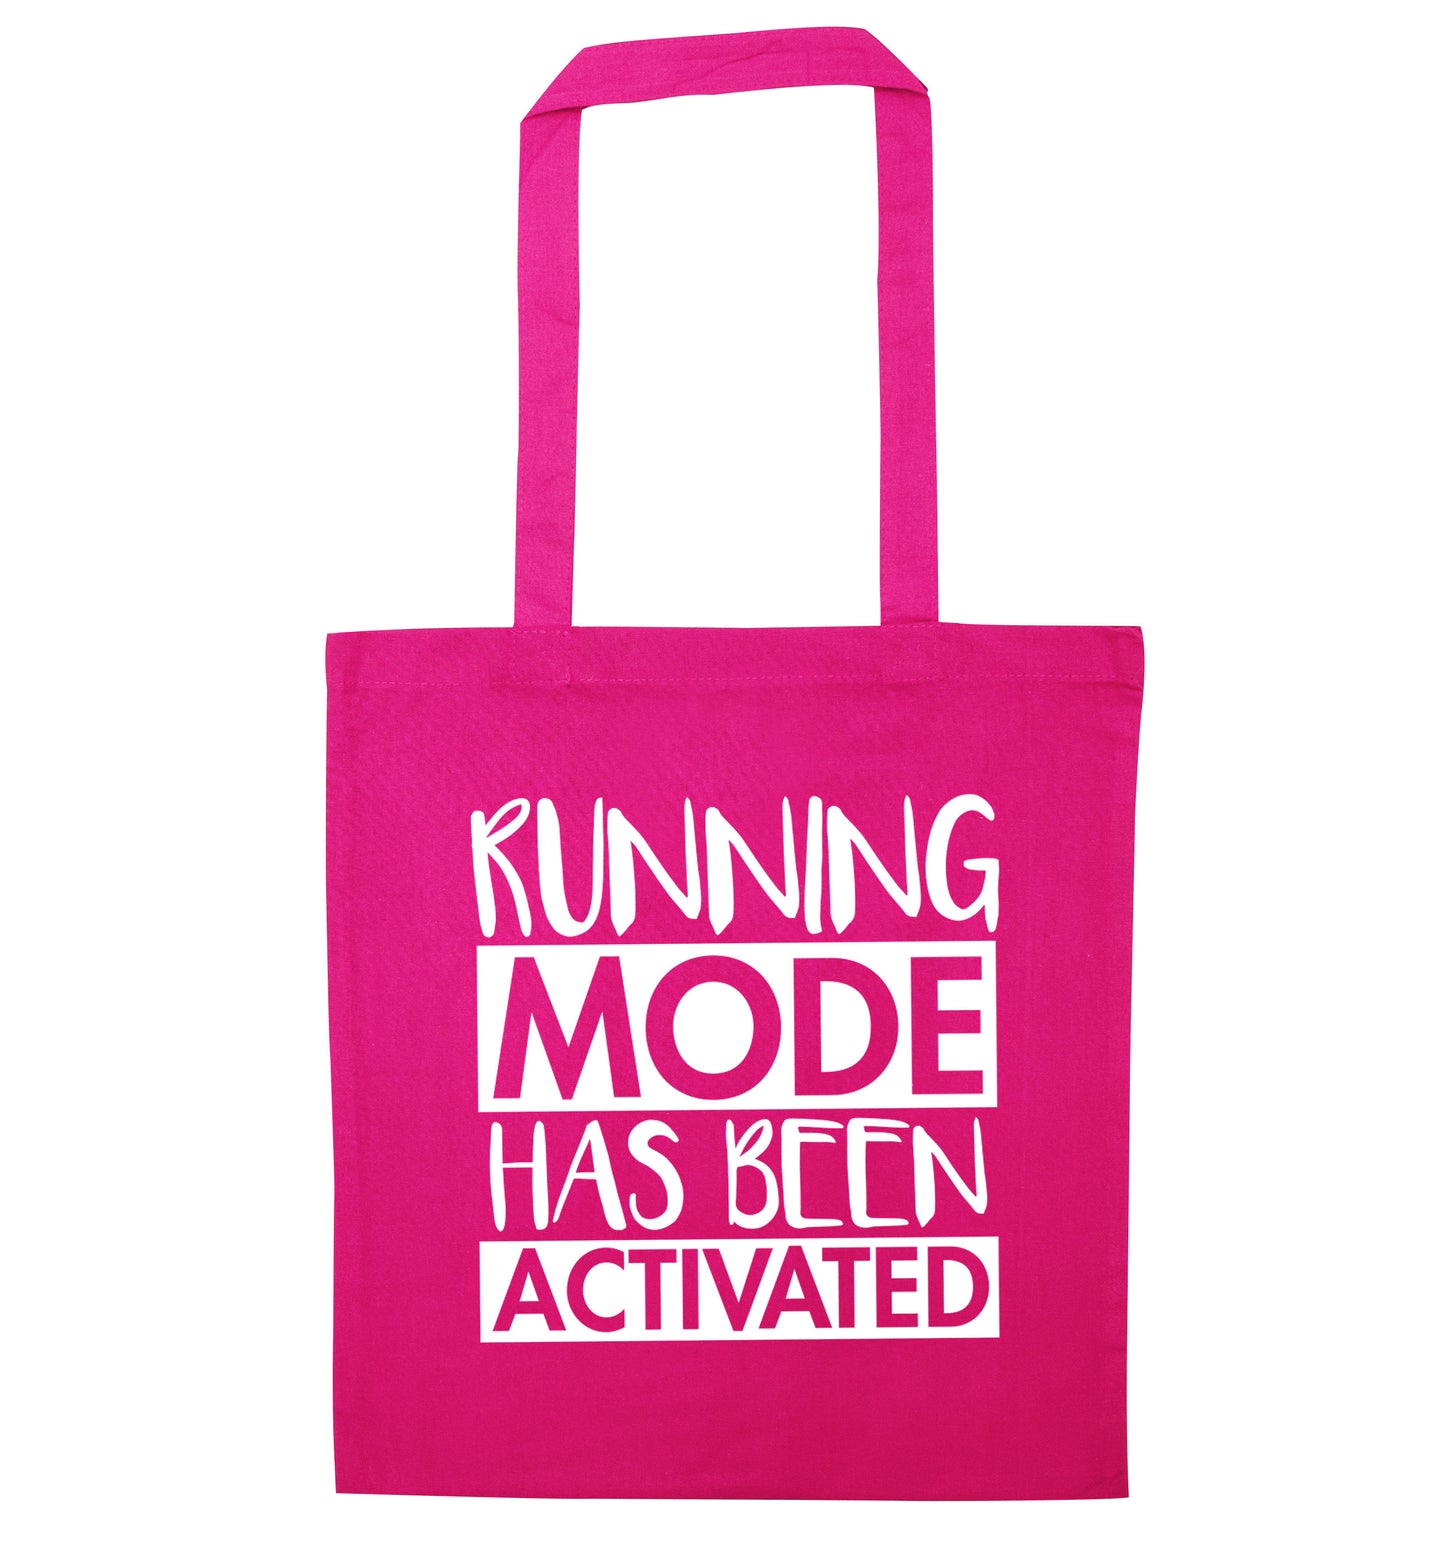 Running mode activated pink tote bag